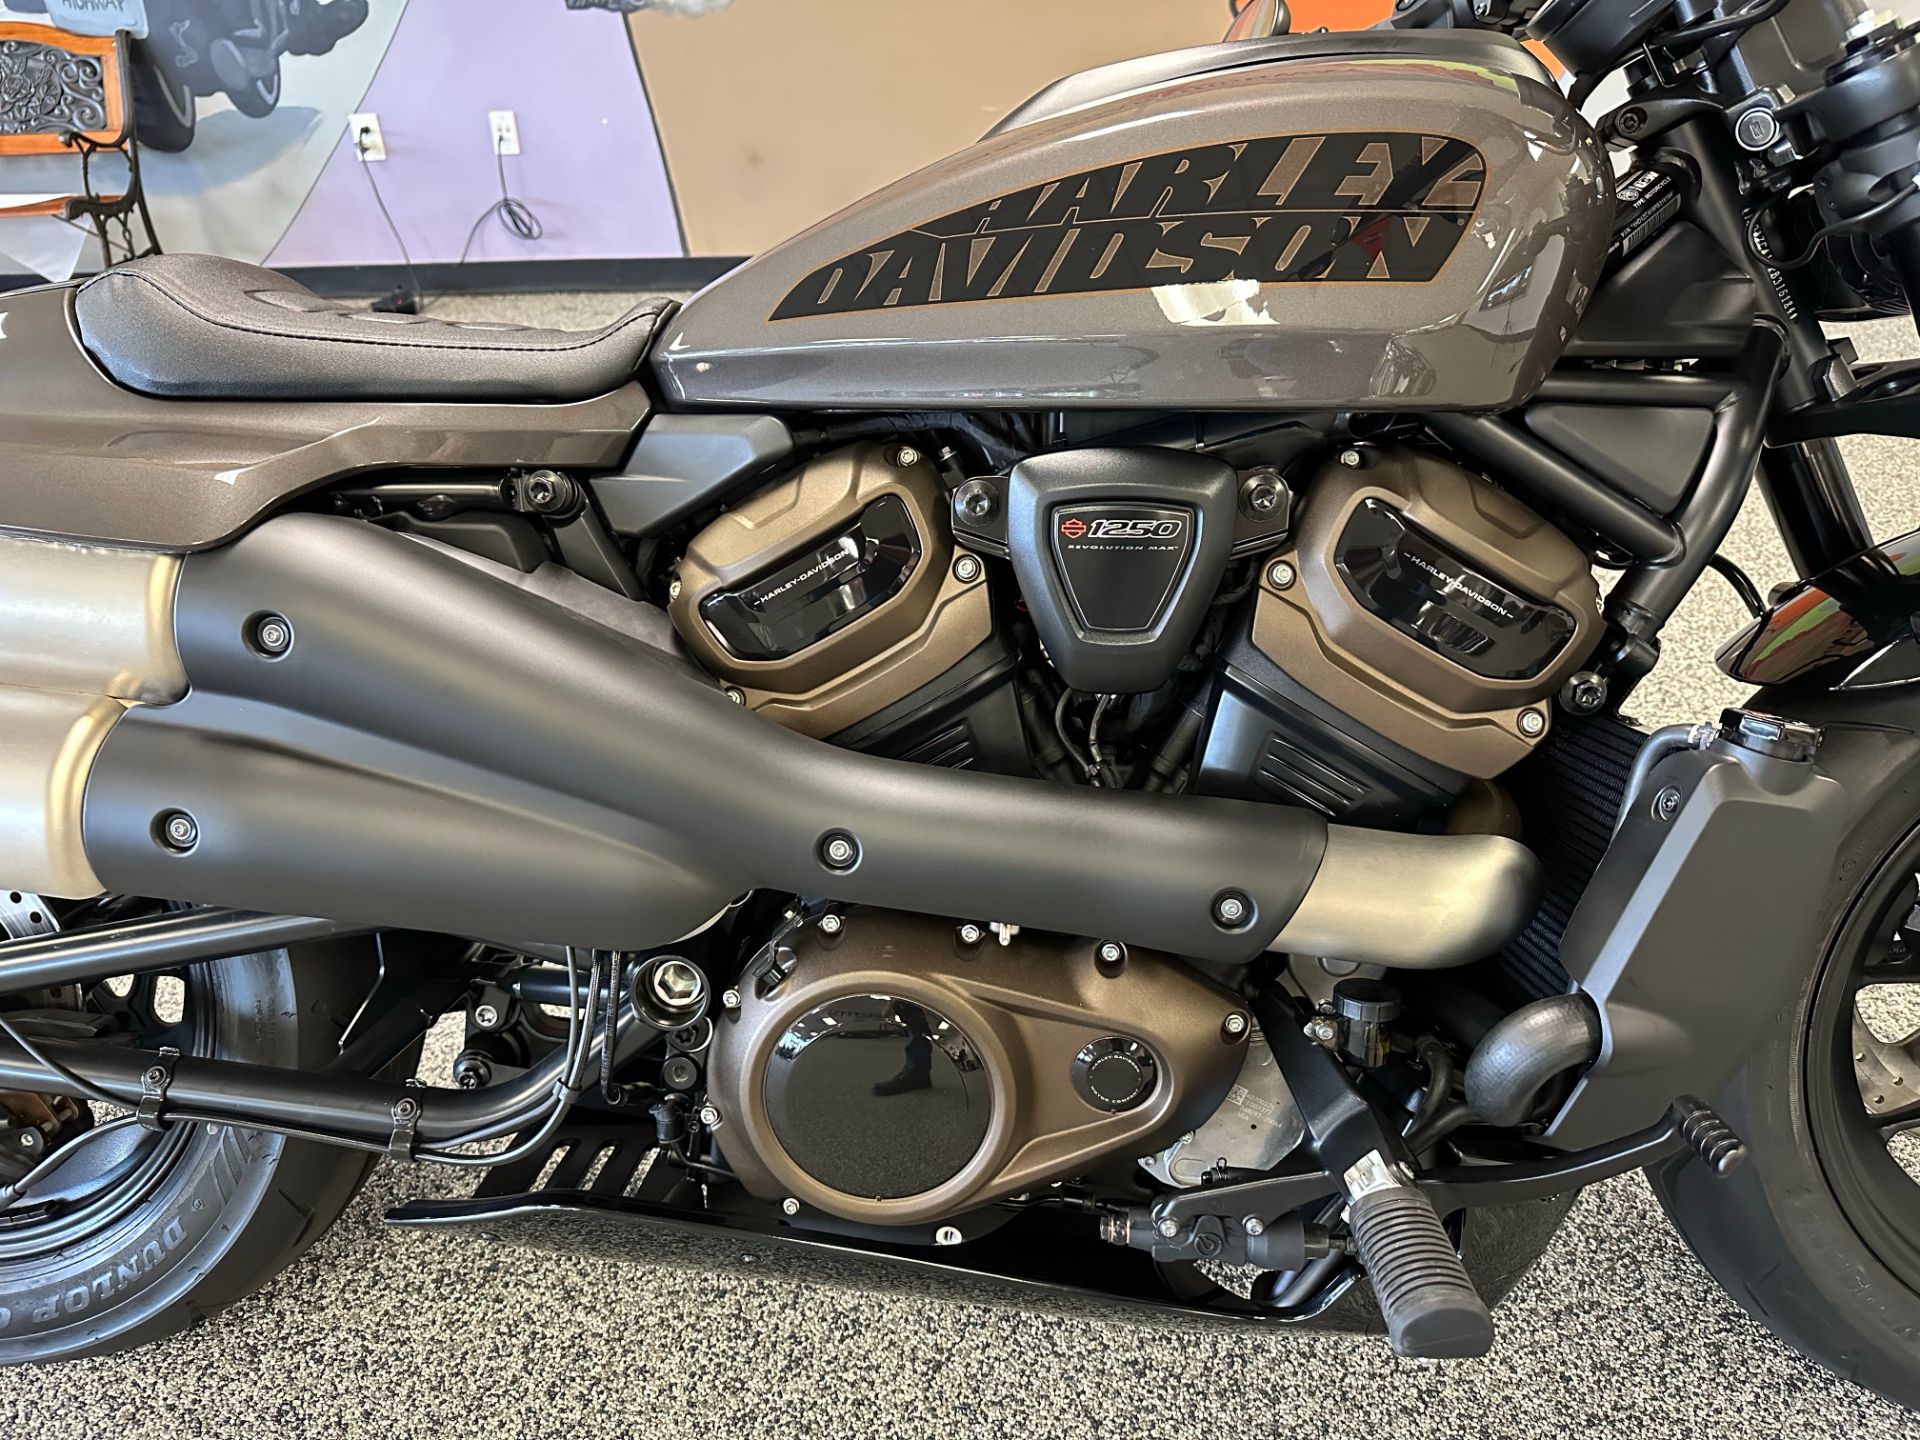 2023 Harley-Davidson Sportster® S in Knoxville, Tennessee - Photo 5